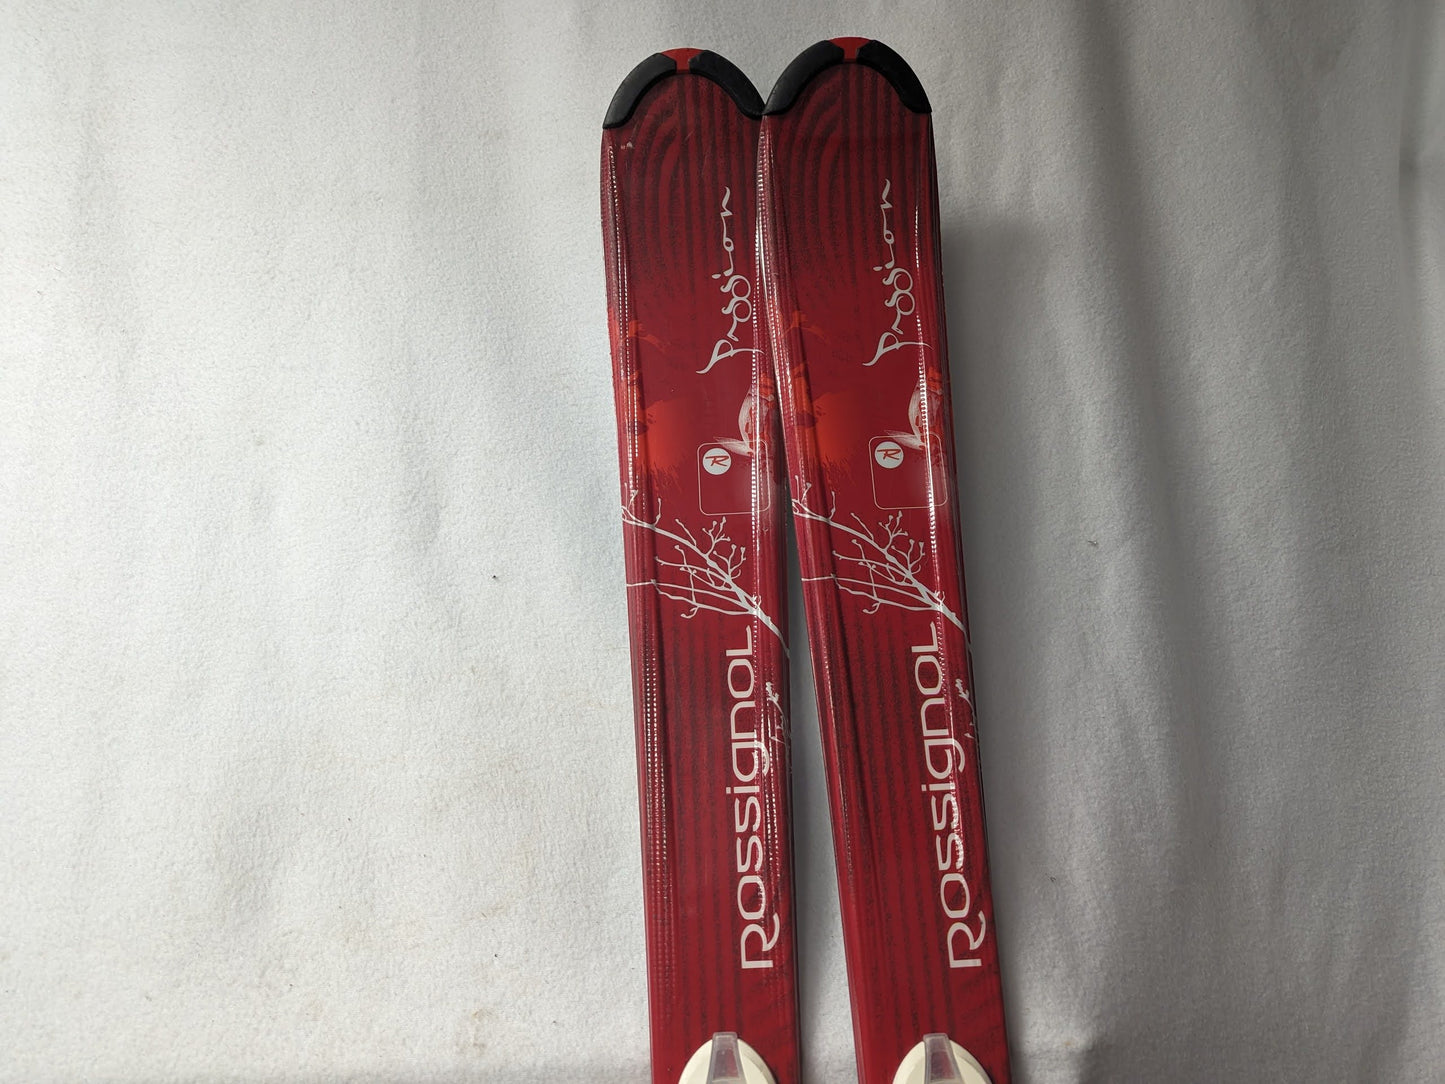 Rossignol Passion Youth Skis w/Rossignol Bindings Size 146 Cm Color Red Condition Used